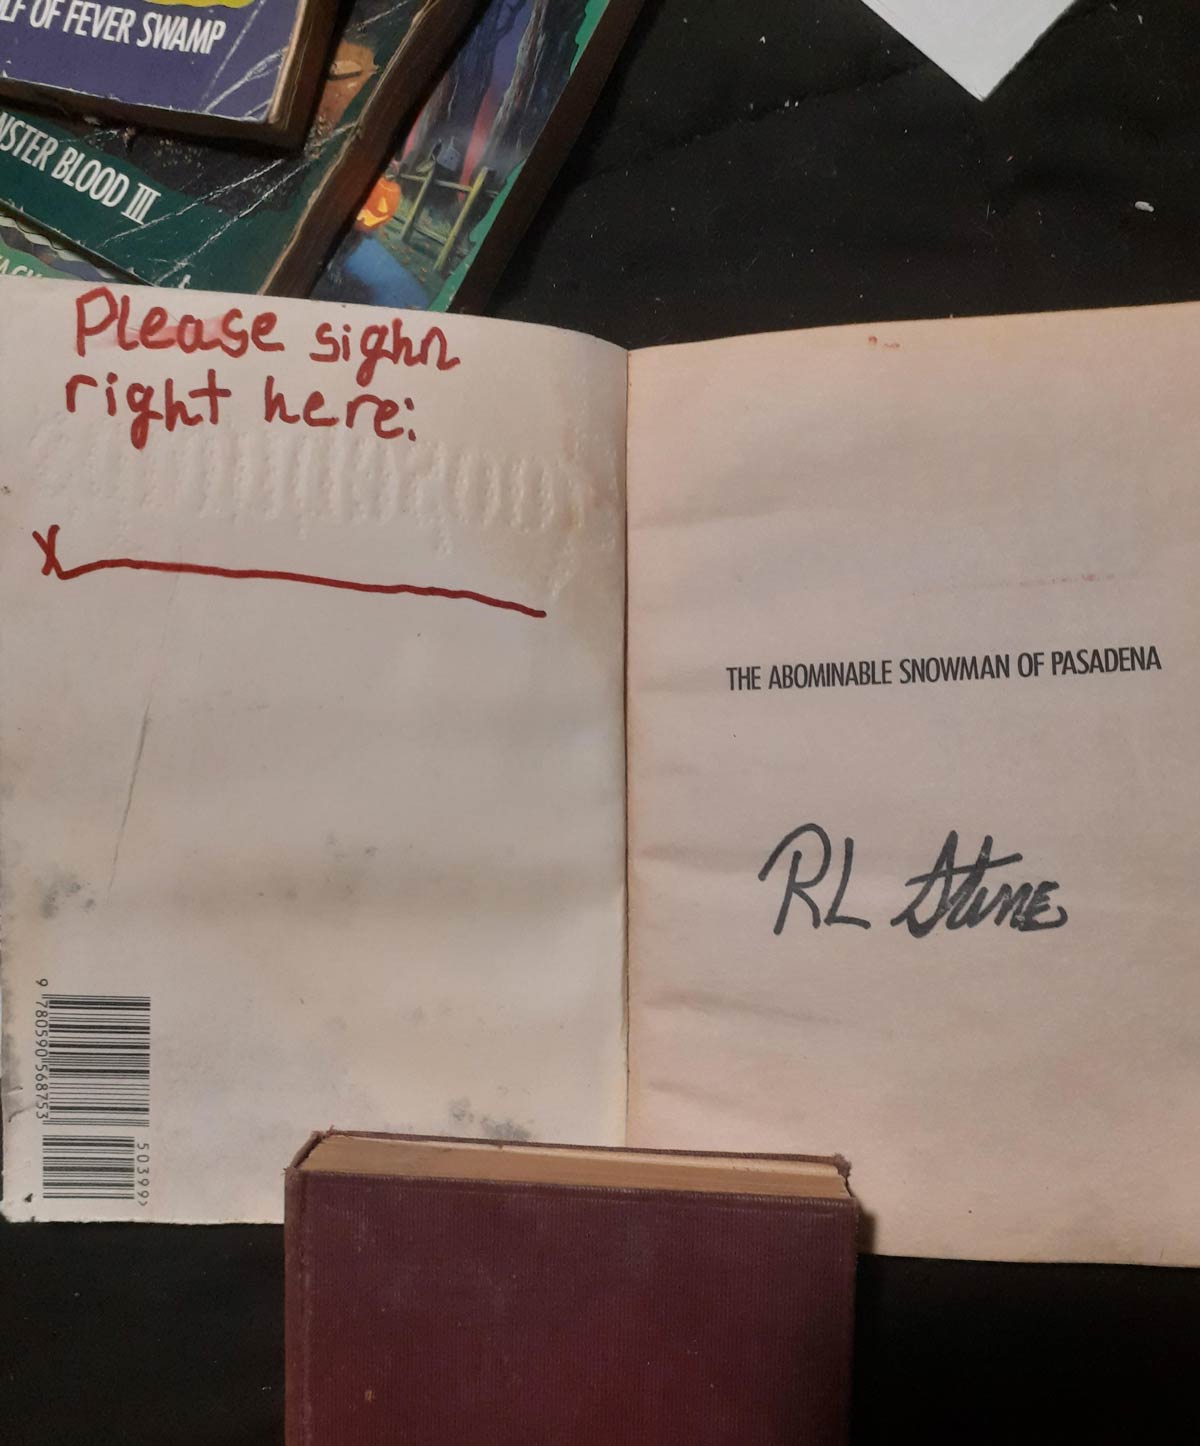 I would like to share with you all the time I was politely dissed by R.L. Stine. I was in 4th Grade and mailed my book to him to autograph